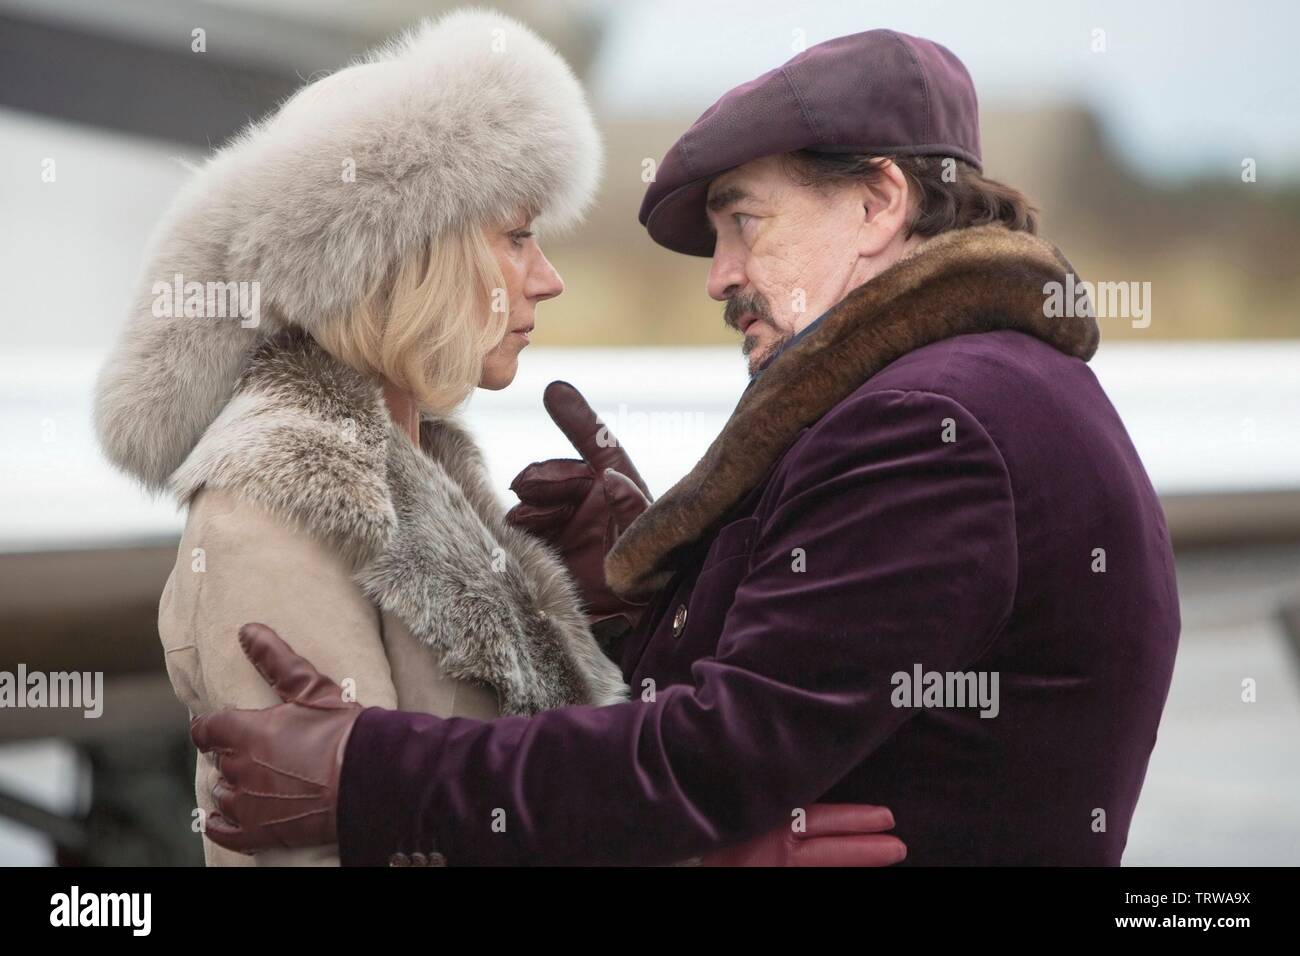 HELEN MIRREN and BRIAN COX in RED 2 (2013). Copyright: Editorial use only.  No merchandising or book covers. This is a publicly distributed handout.  Access rights only, no license of copyright provided.